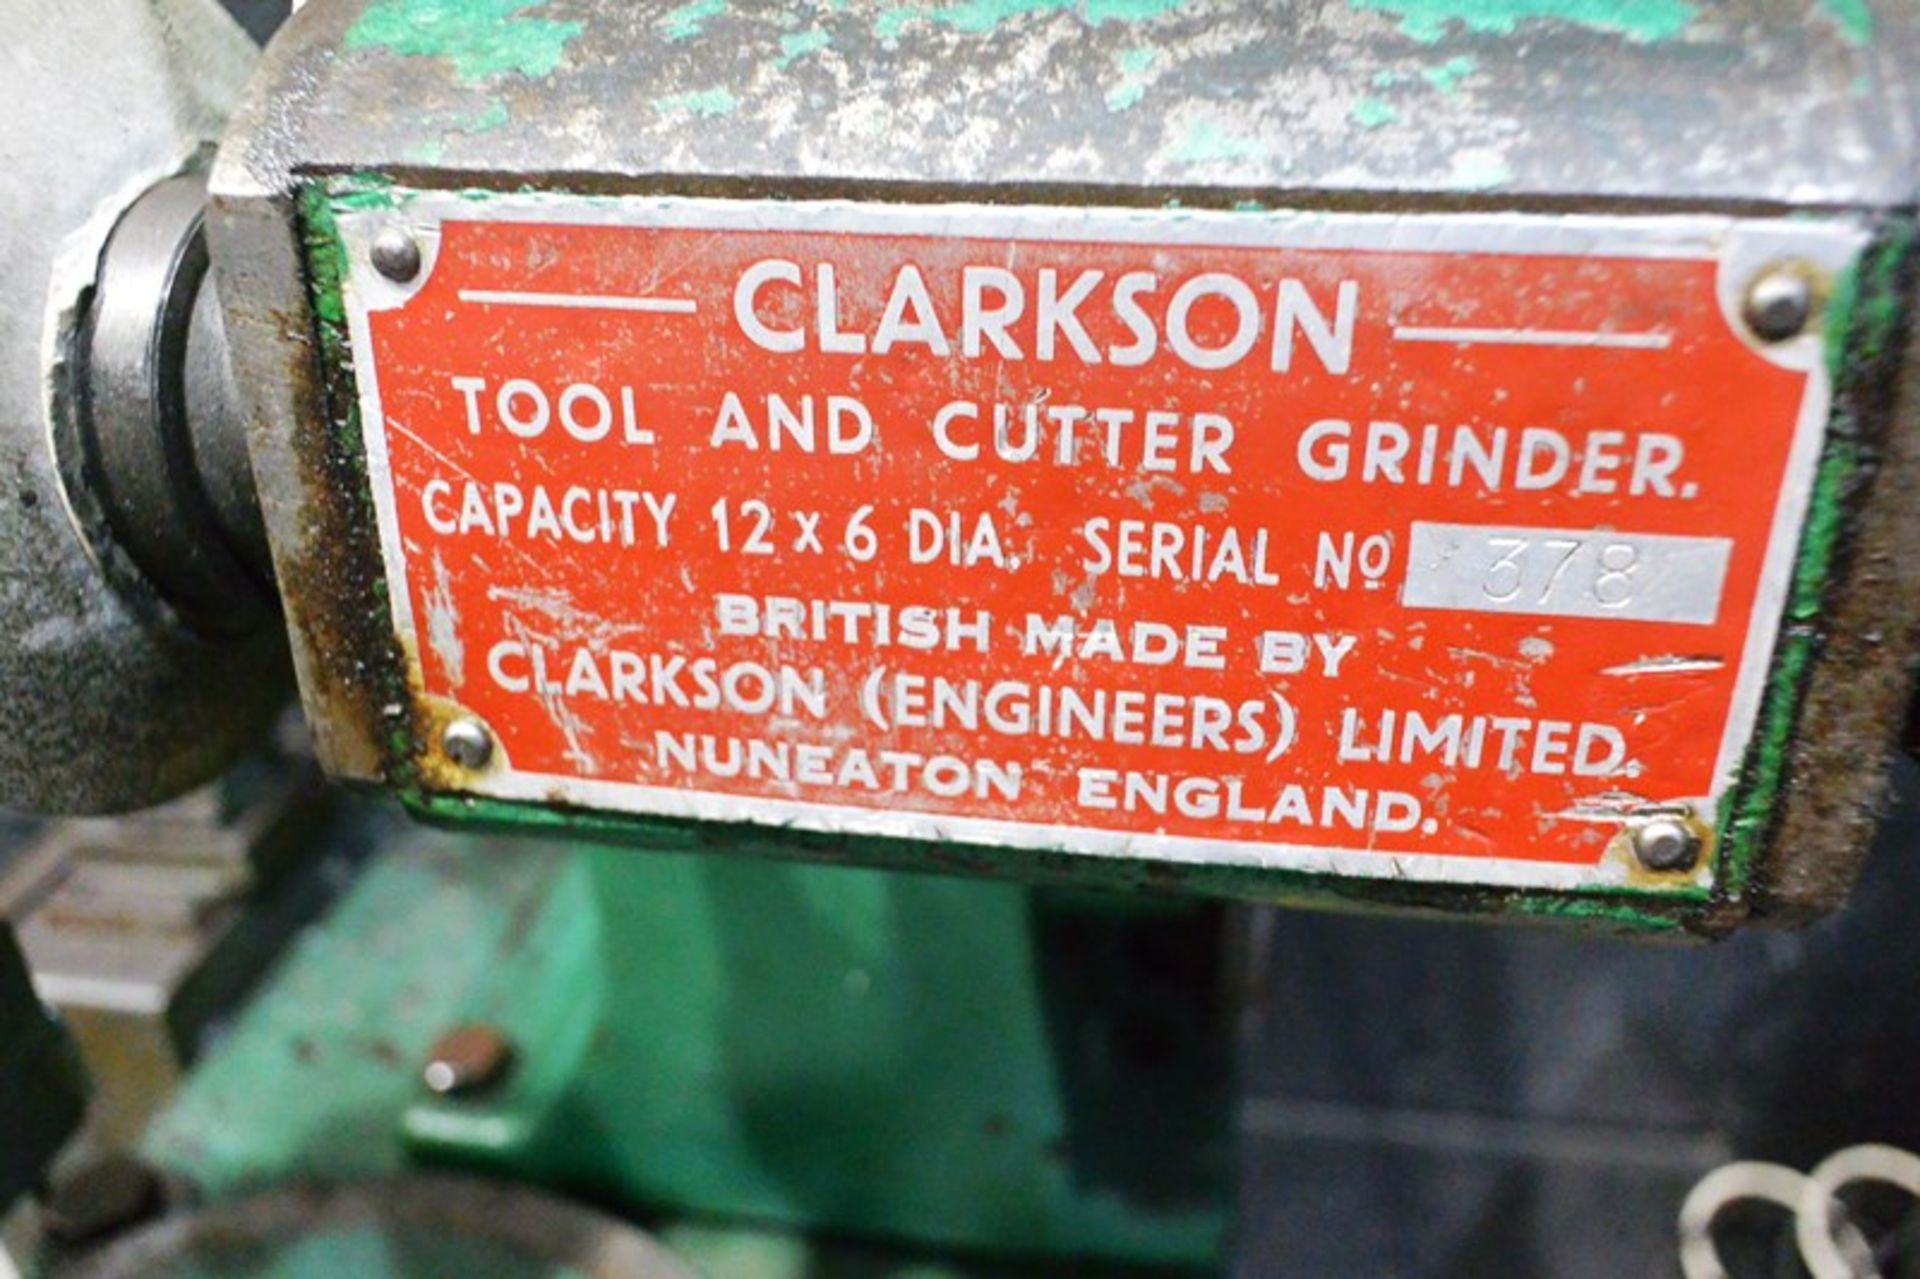 Clarkson 12" x 6" tool and cutter grinder, equipment no. 10392, serial no. 378 - Image 3 of 5